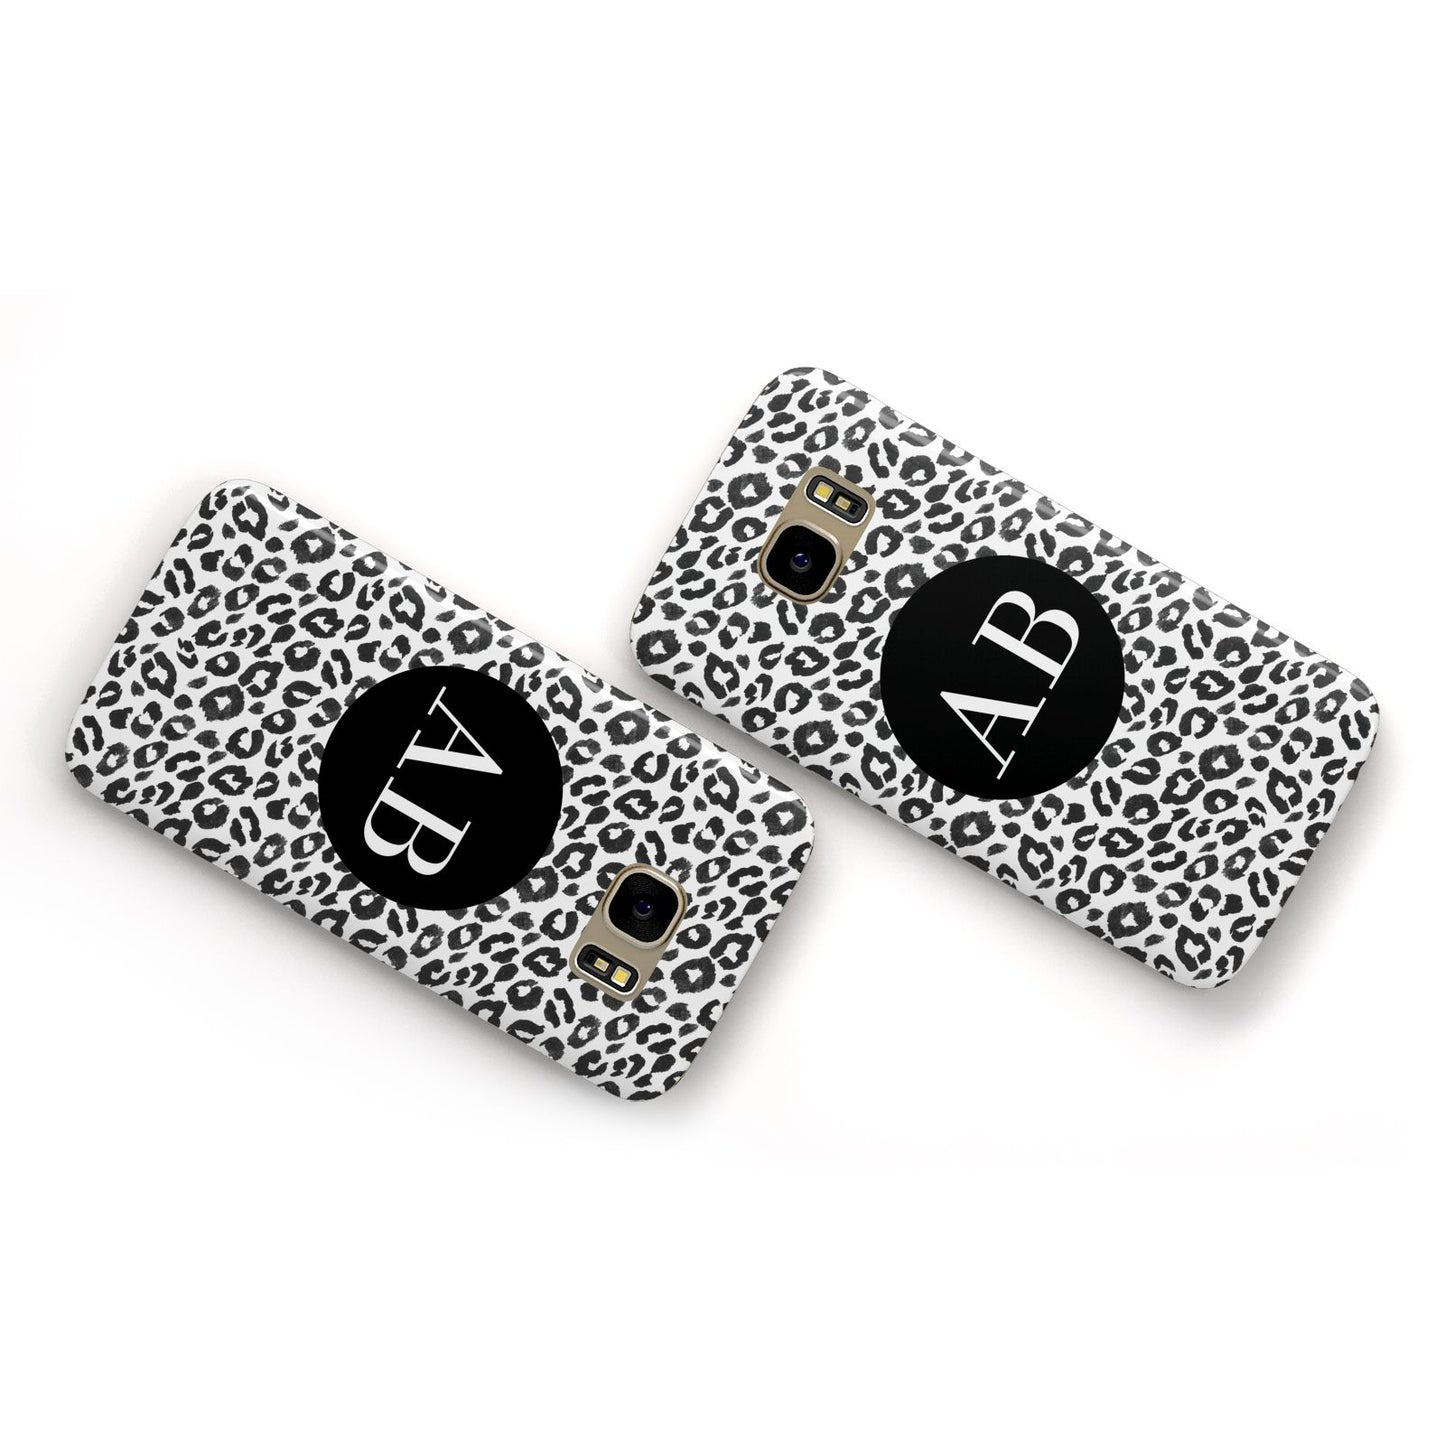 Leopard Print Black and White Samsung Galaxy Case Flat Overview